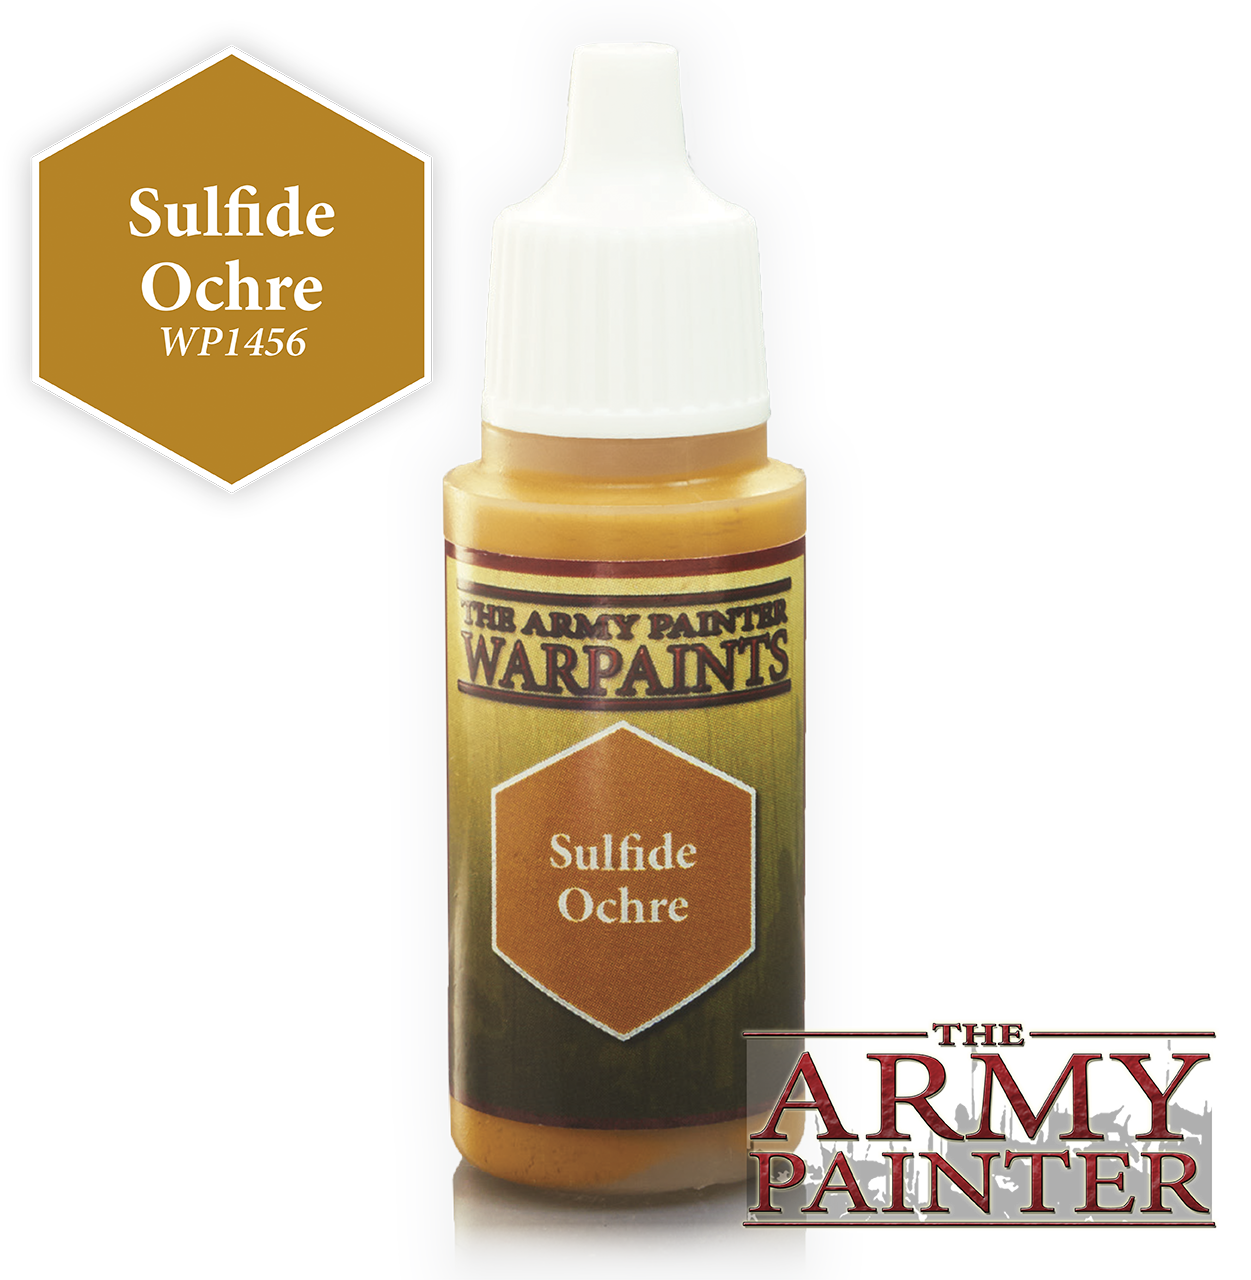 The ARMY PAINTER: Acrylics Warpaint - Sulphide Ochre | Tacoma Games